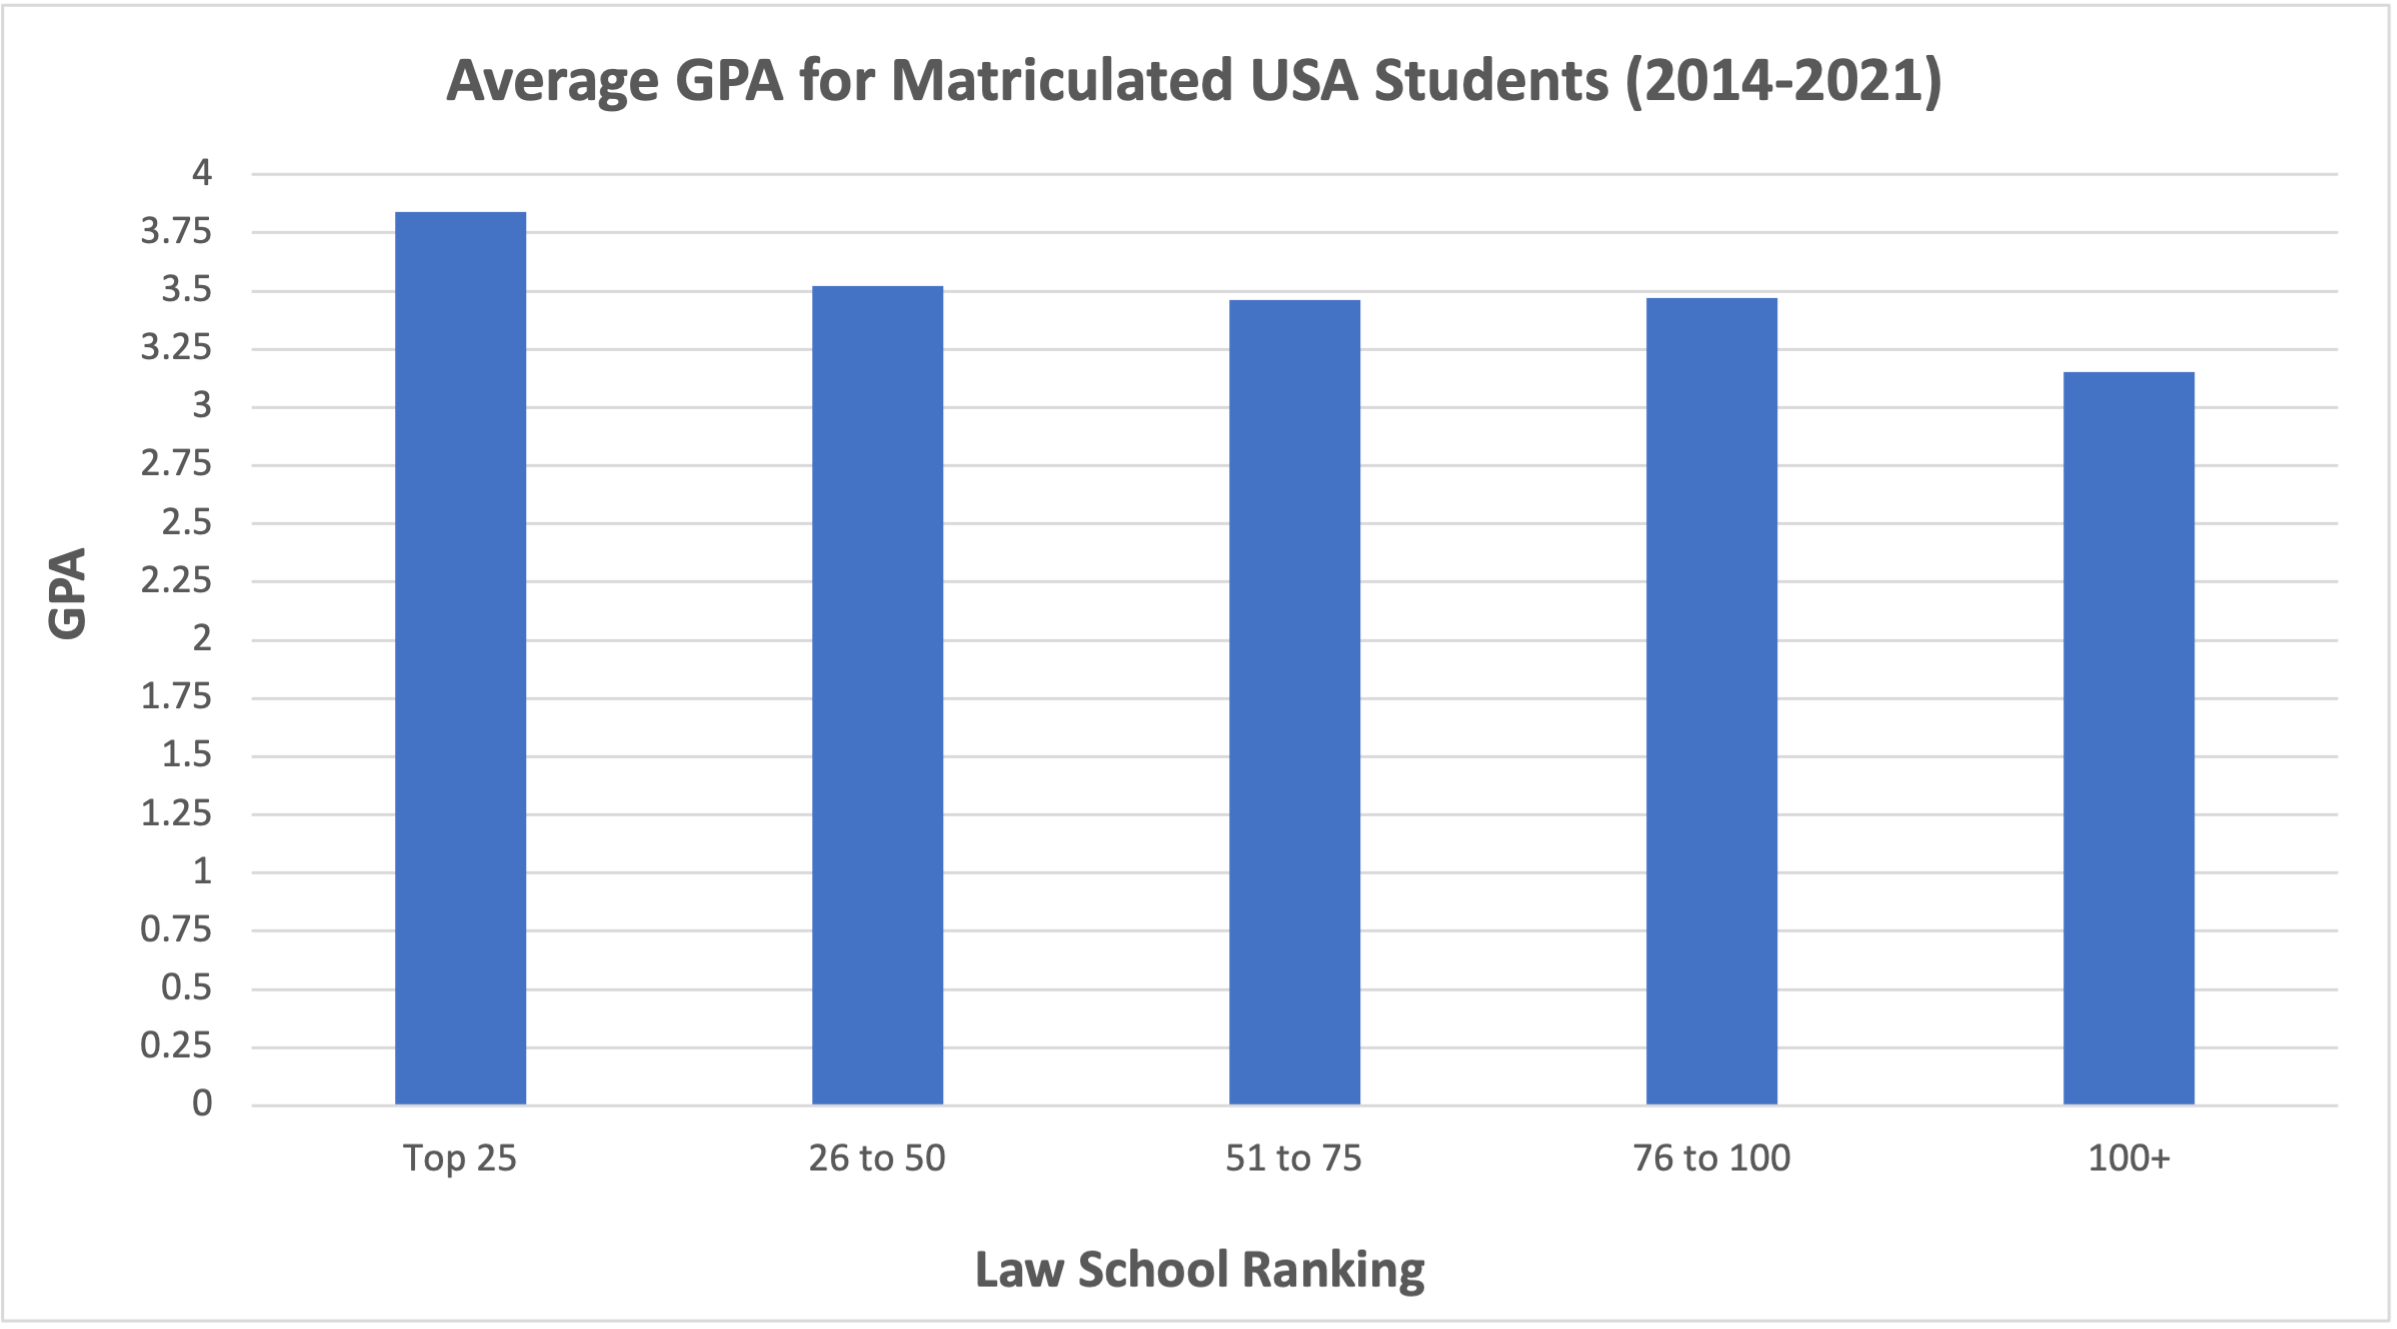 Average GPA for Maticulated USA Students (2014 - 2021)